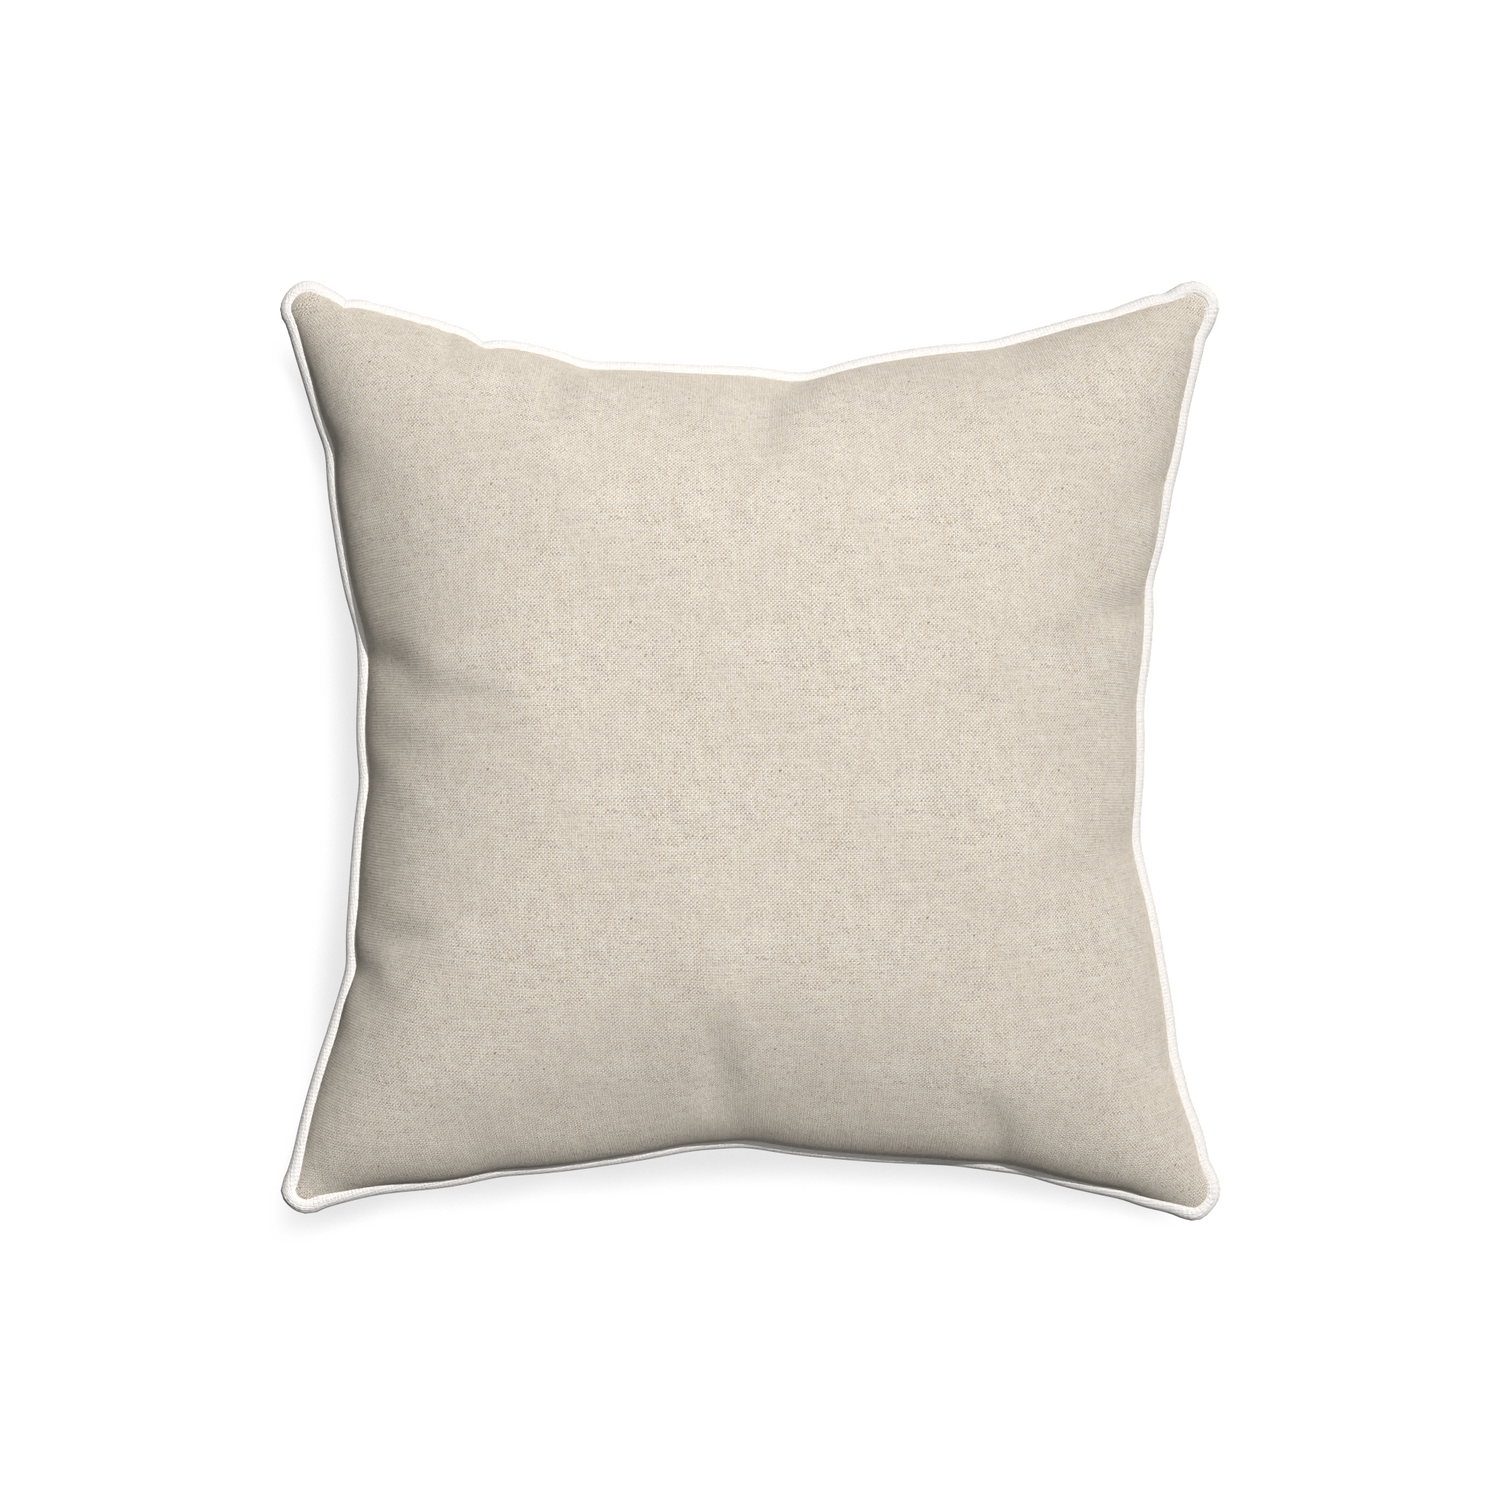 20-square oat custom light brownpillow with snow piping on white background